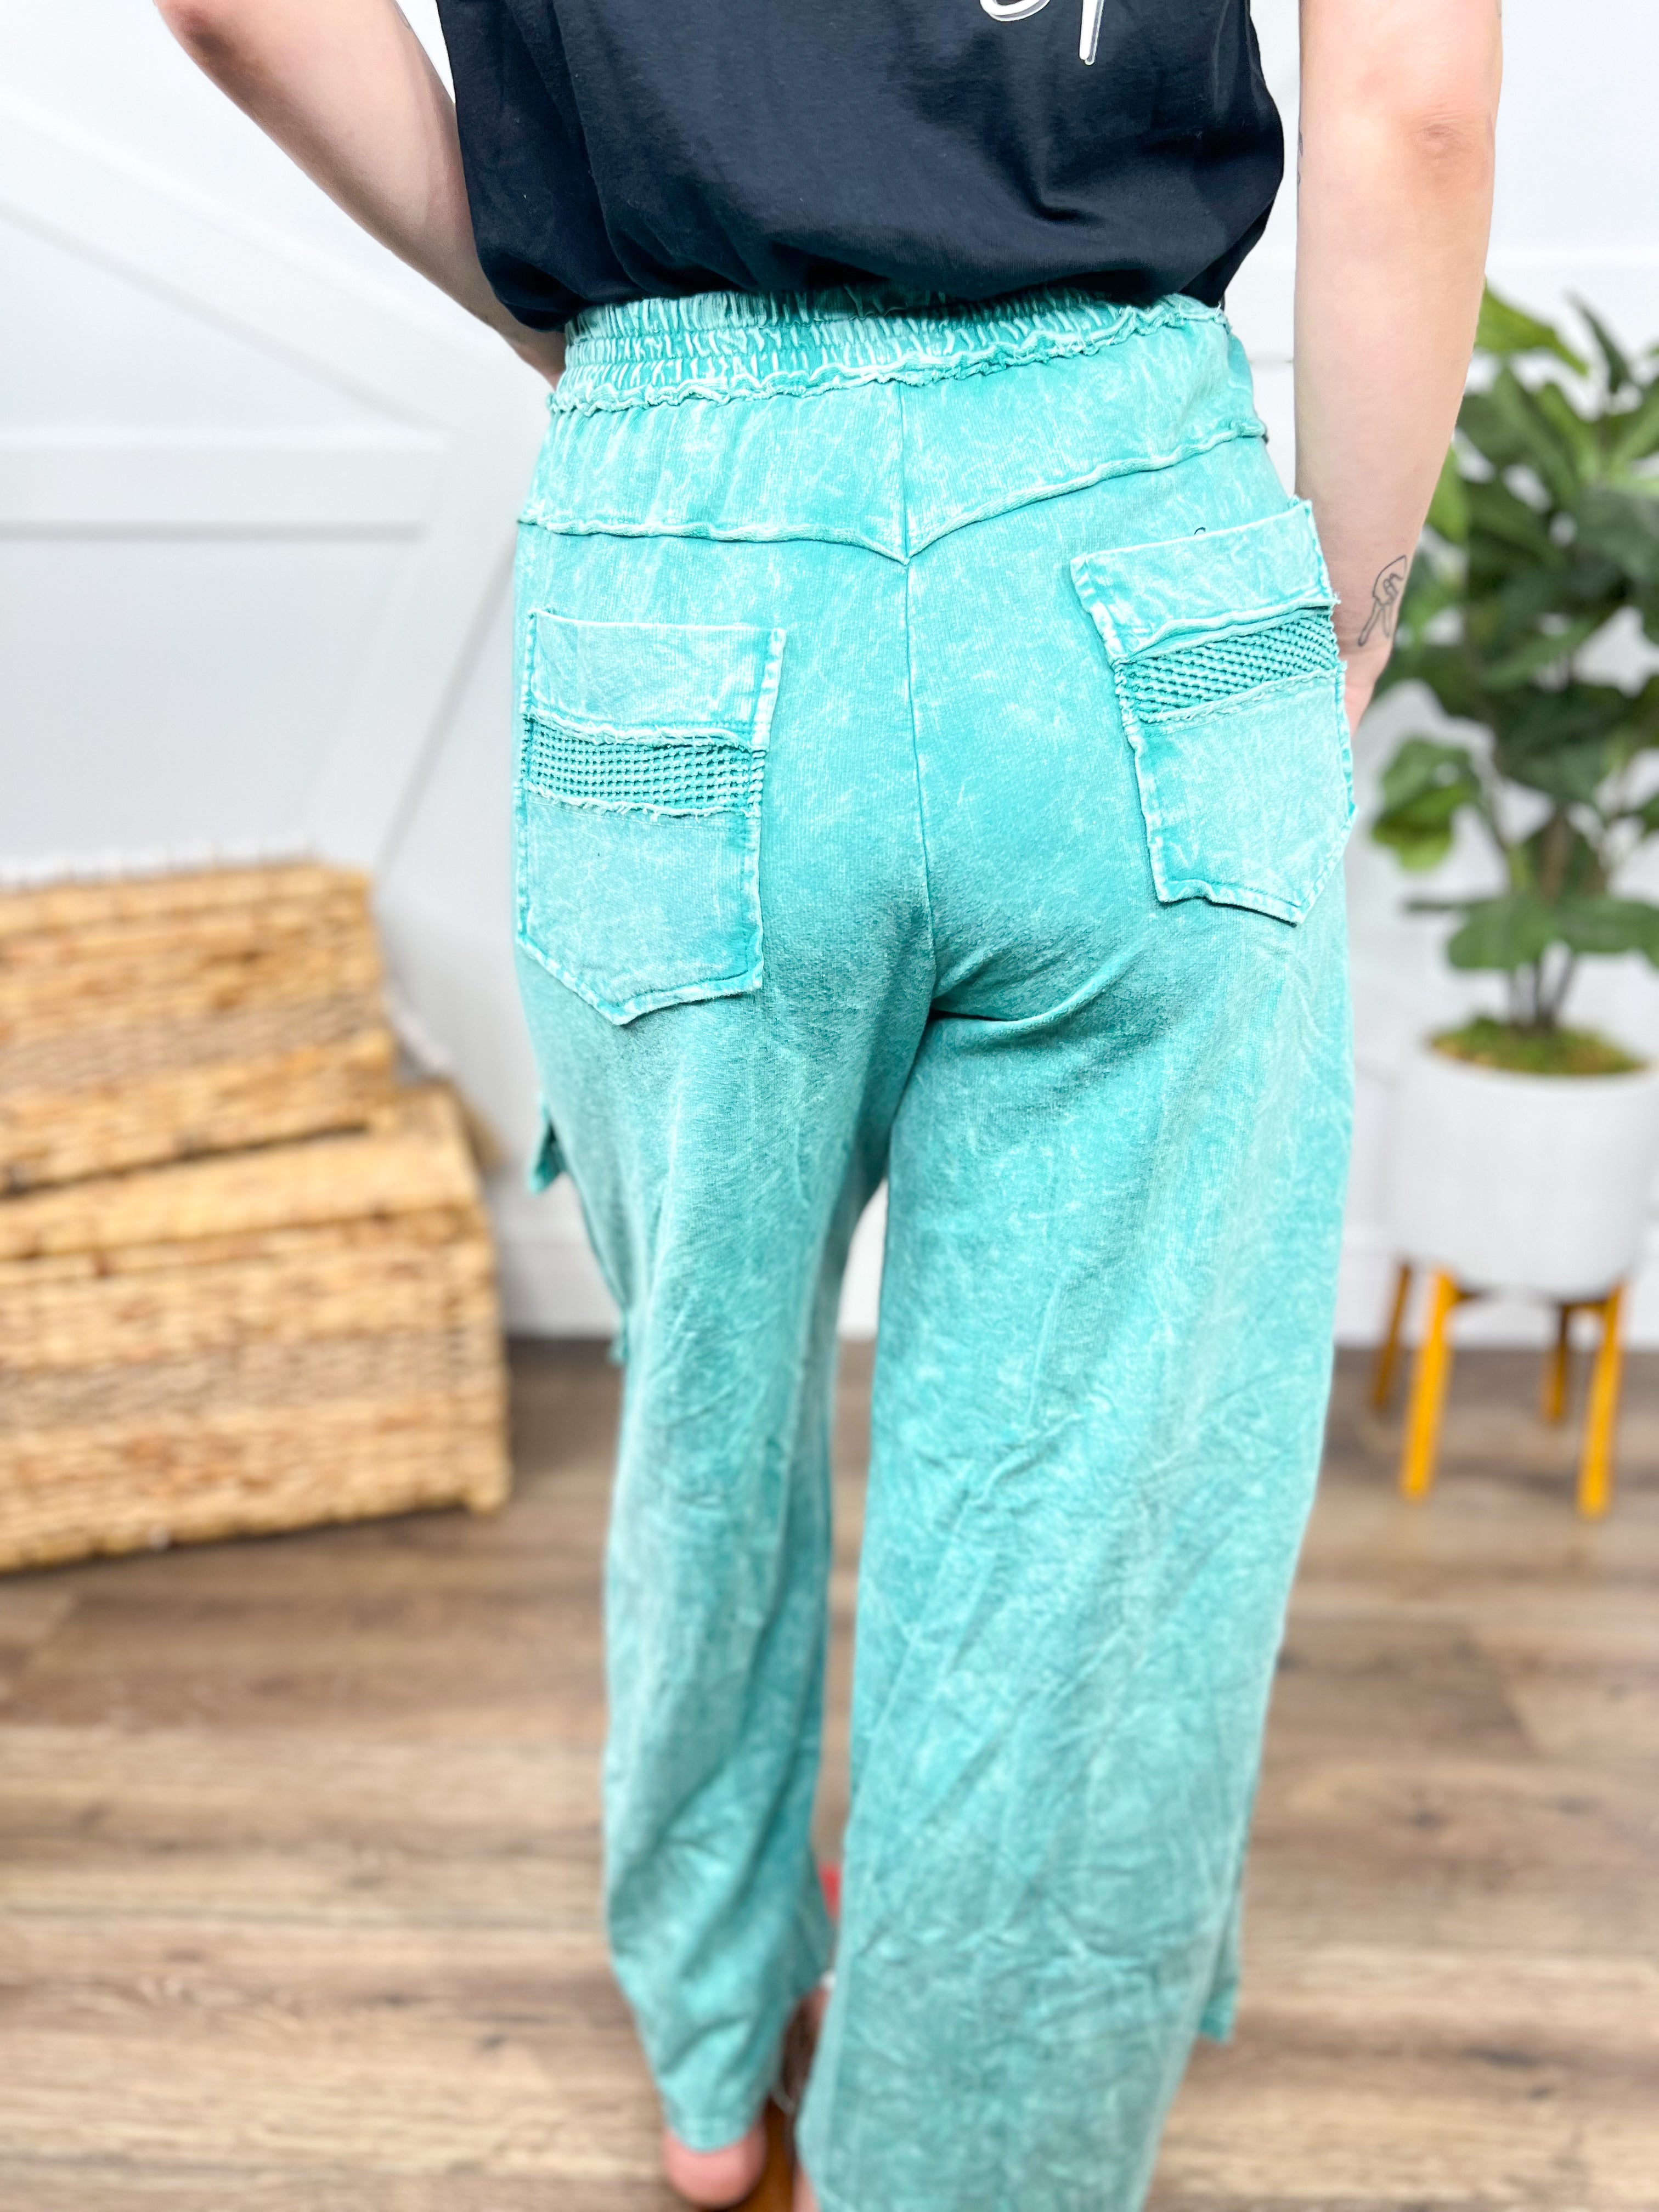 RESTOCK: No Hesitation Cargo Pants-150 PANTS-J. Her-Heathered Boho Boutique, Women's Fashion and Accessories in Palmetto, FL